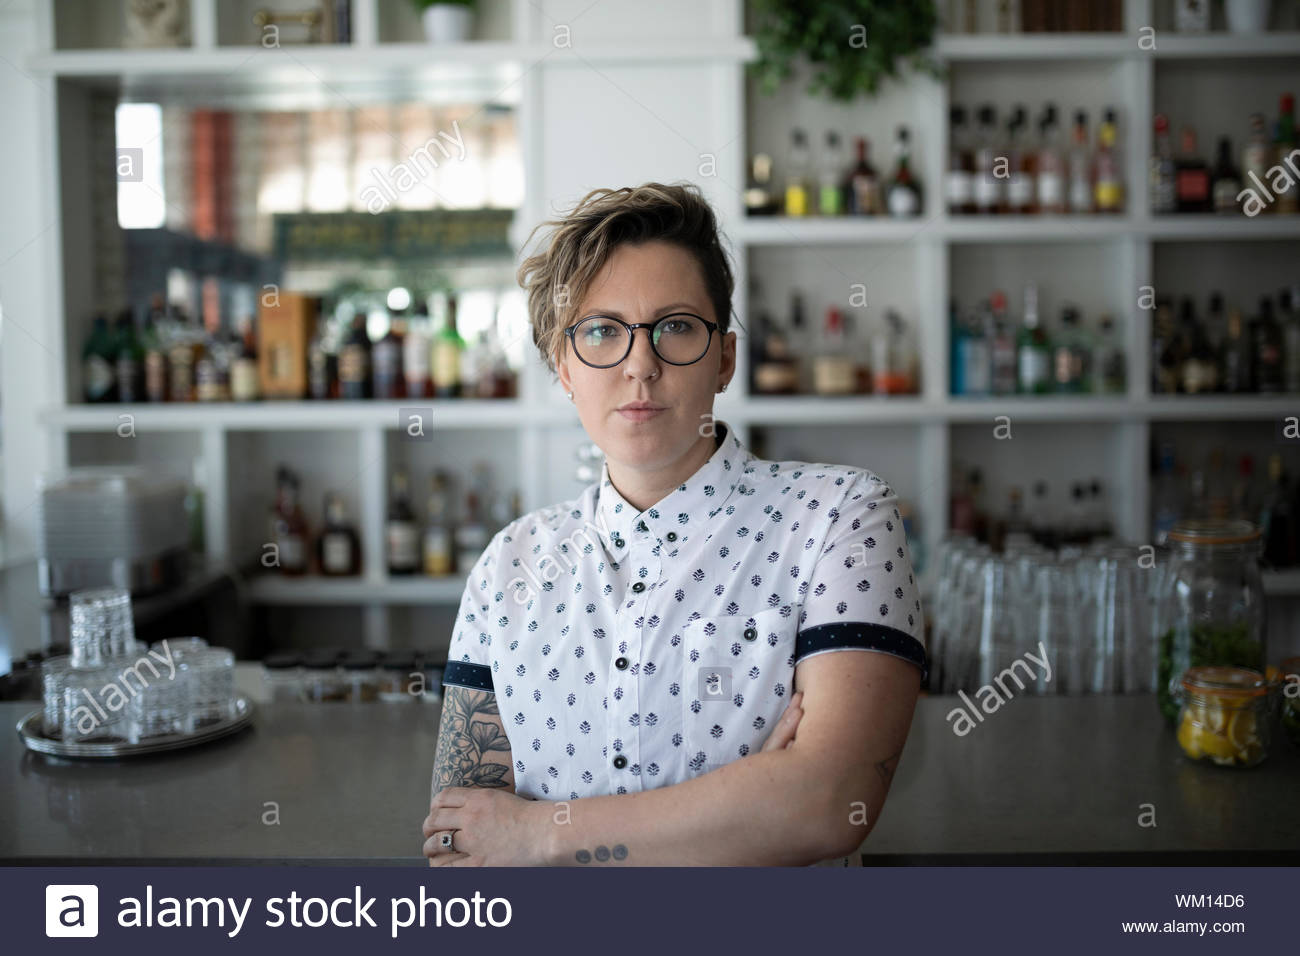 Portrait of small business owner in cafe looking at camera Stock Photo